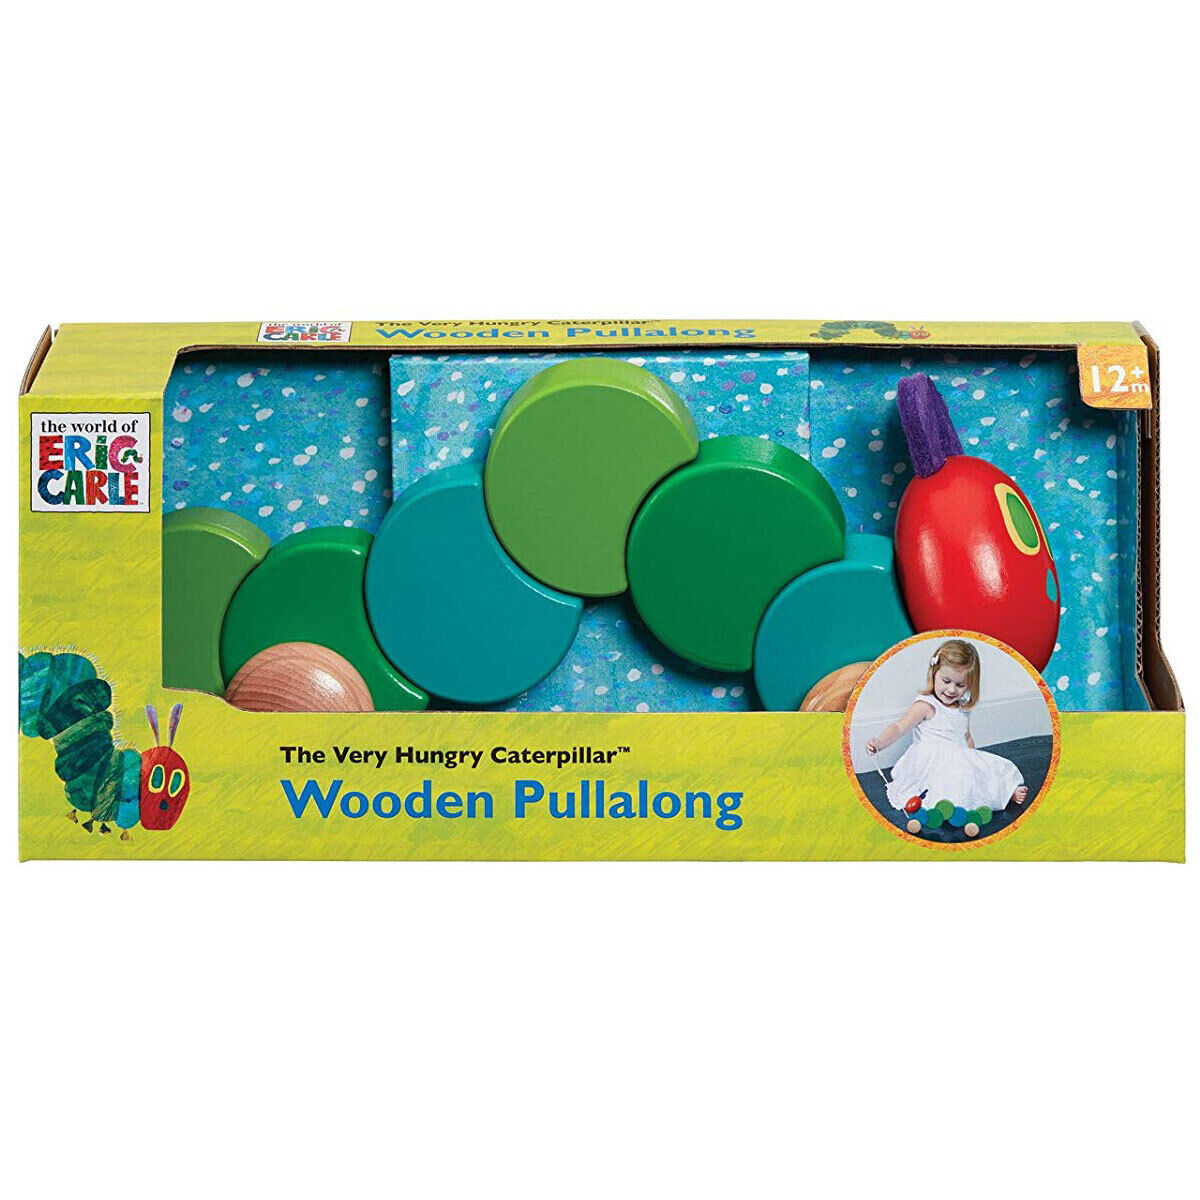 New Very Hungry Caterpillar Wooden Pullalong Toy - Fun for Kids!